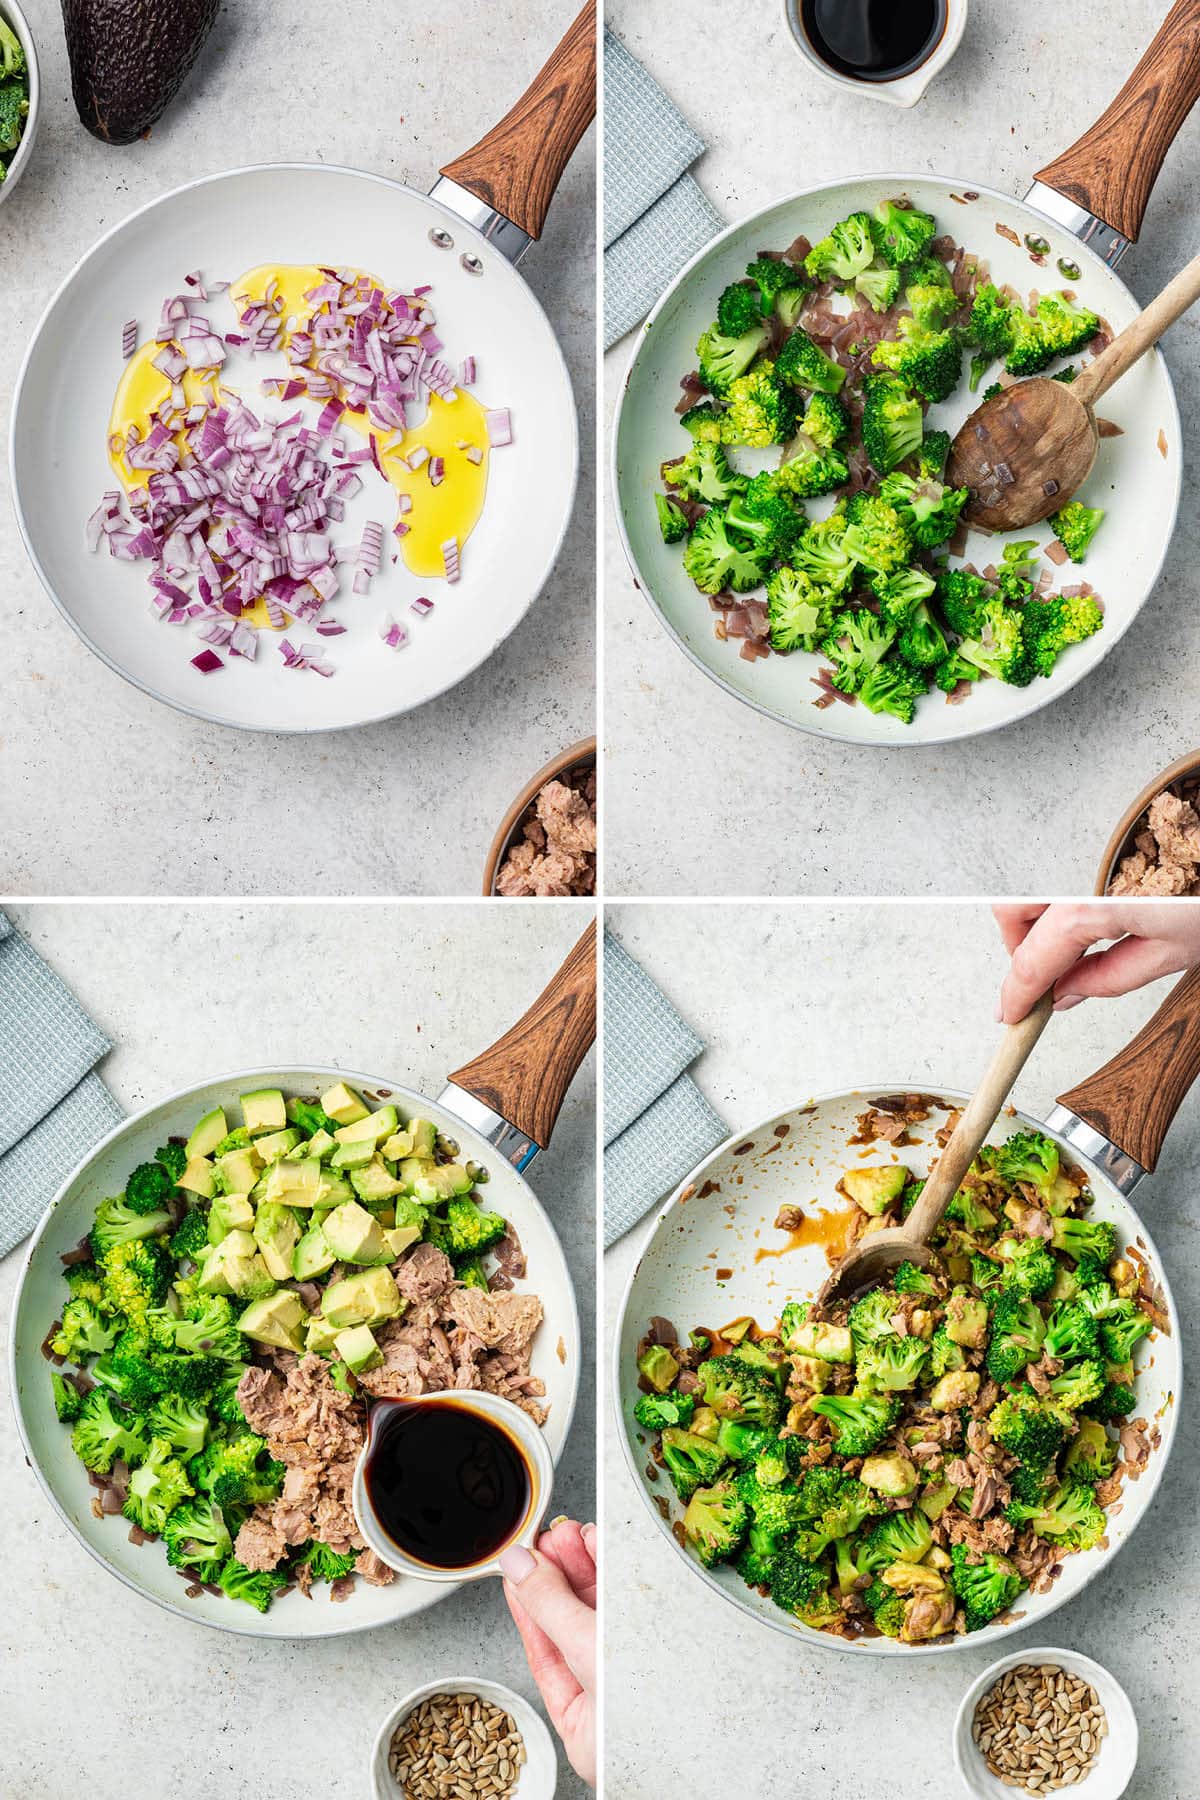 Collage of four photos showing the steps to make a Broccoli Avocado Tuna Bowl: sautéing onions and broccoli, adding avocado, tuna and tamari and then mixing together in the pan.